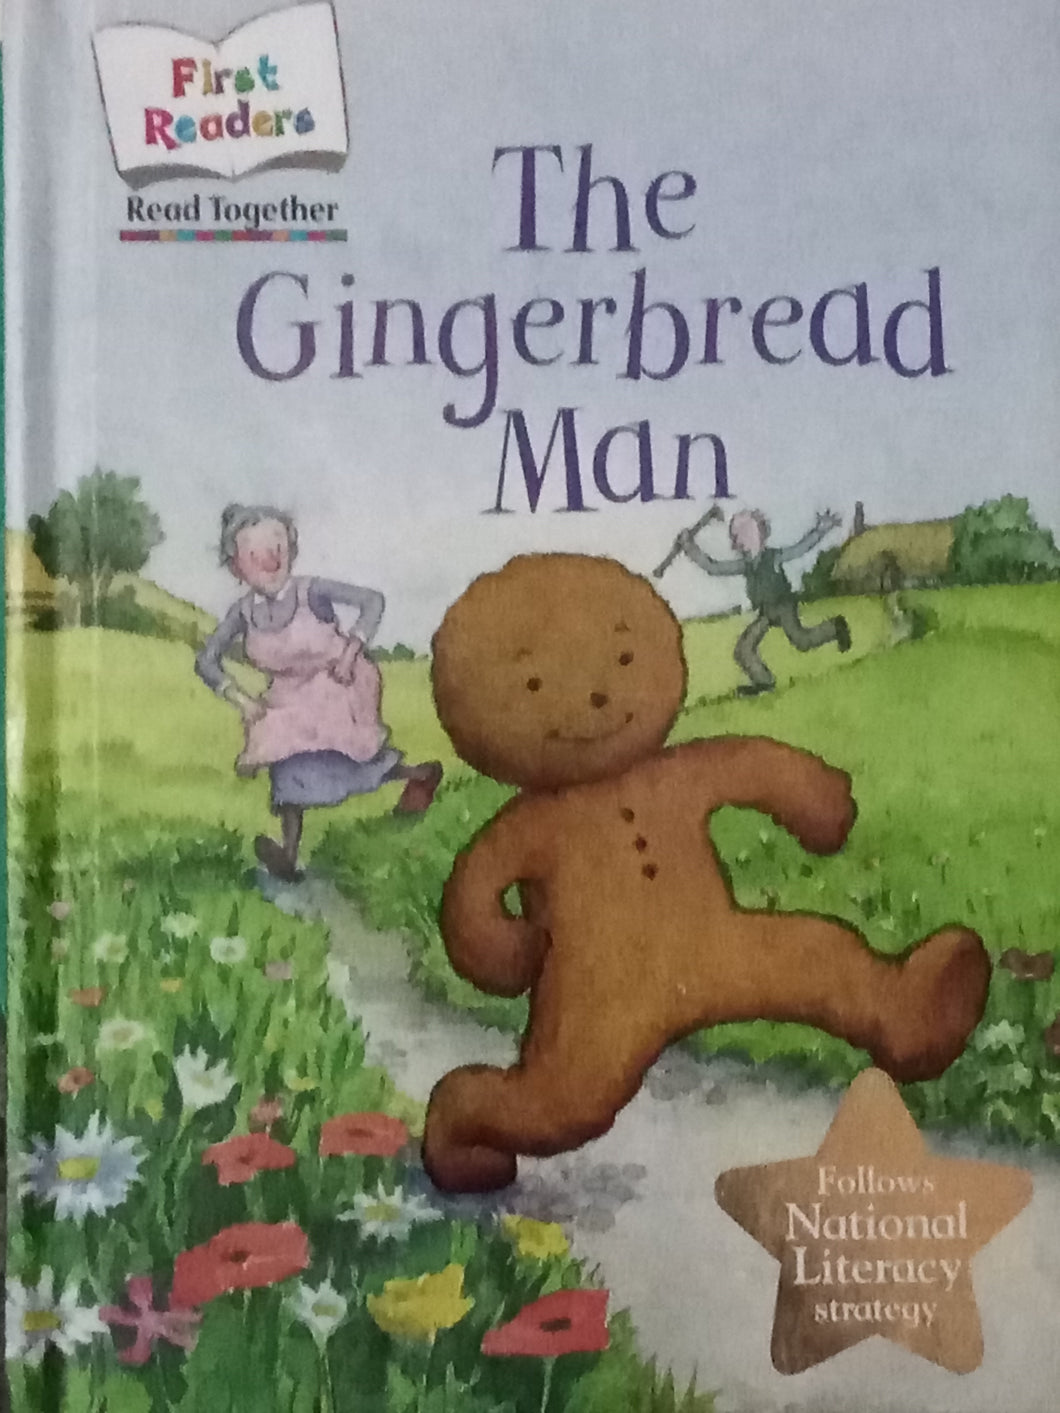 First Readers: The Gingerbread Man